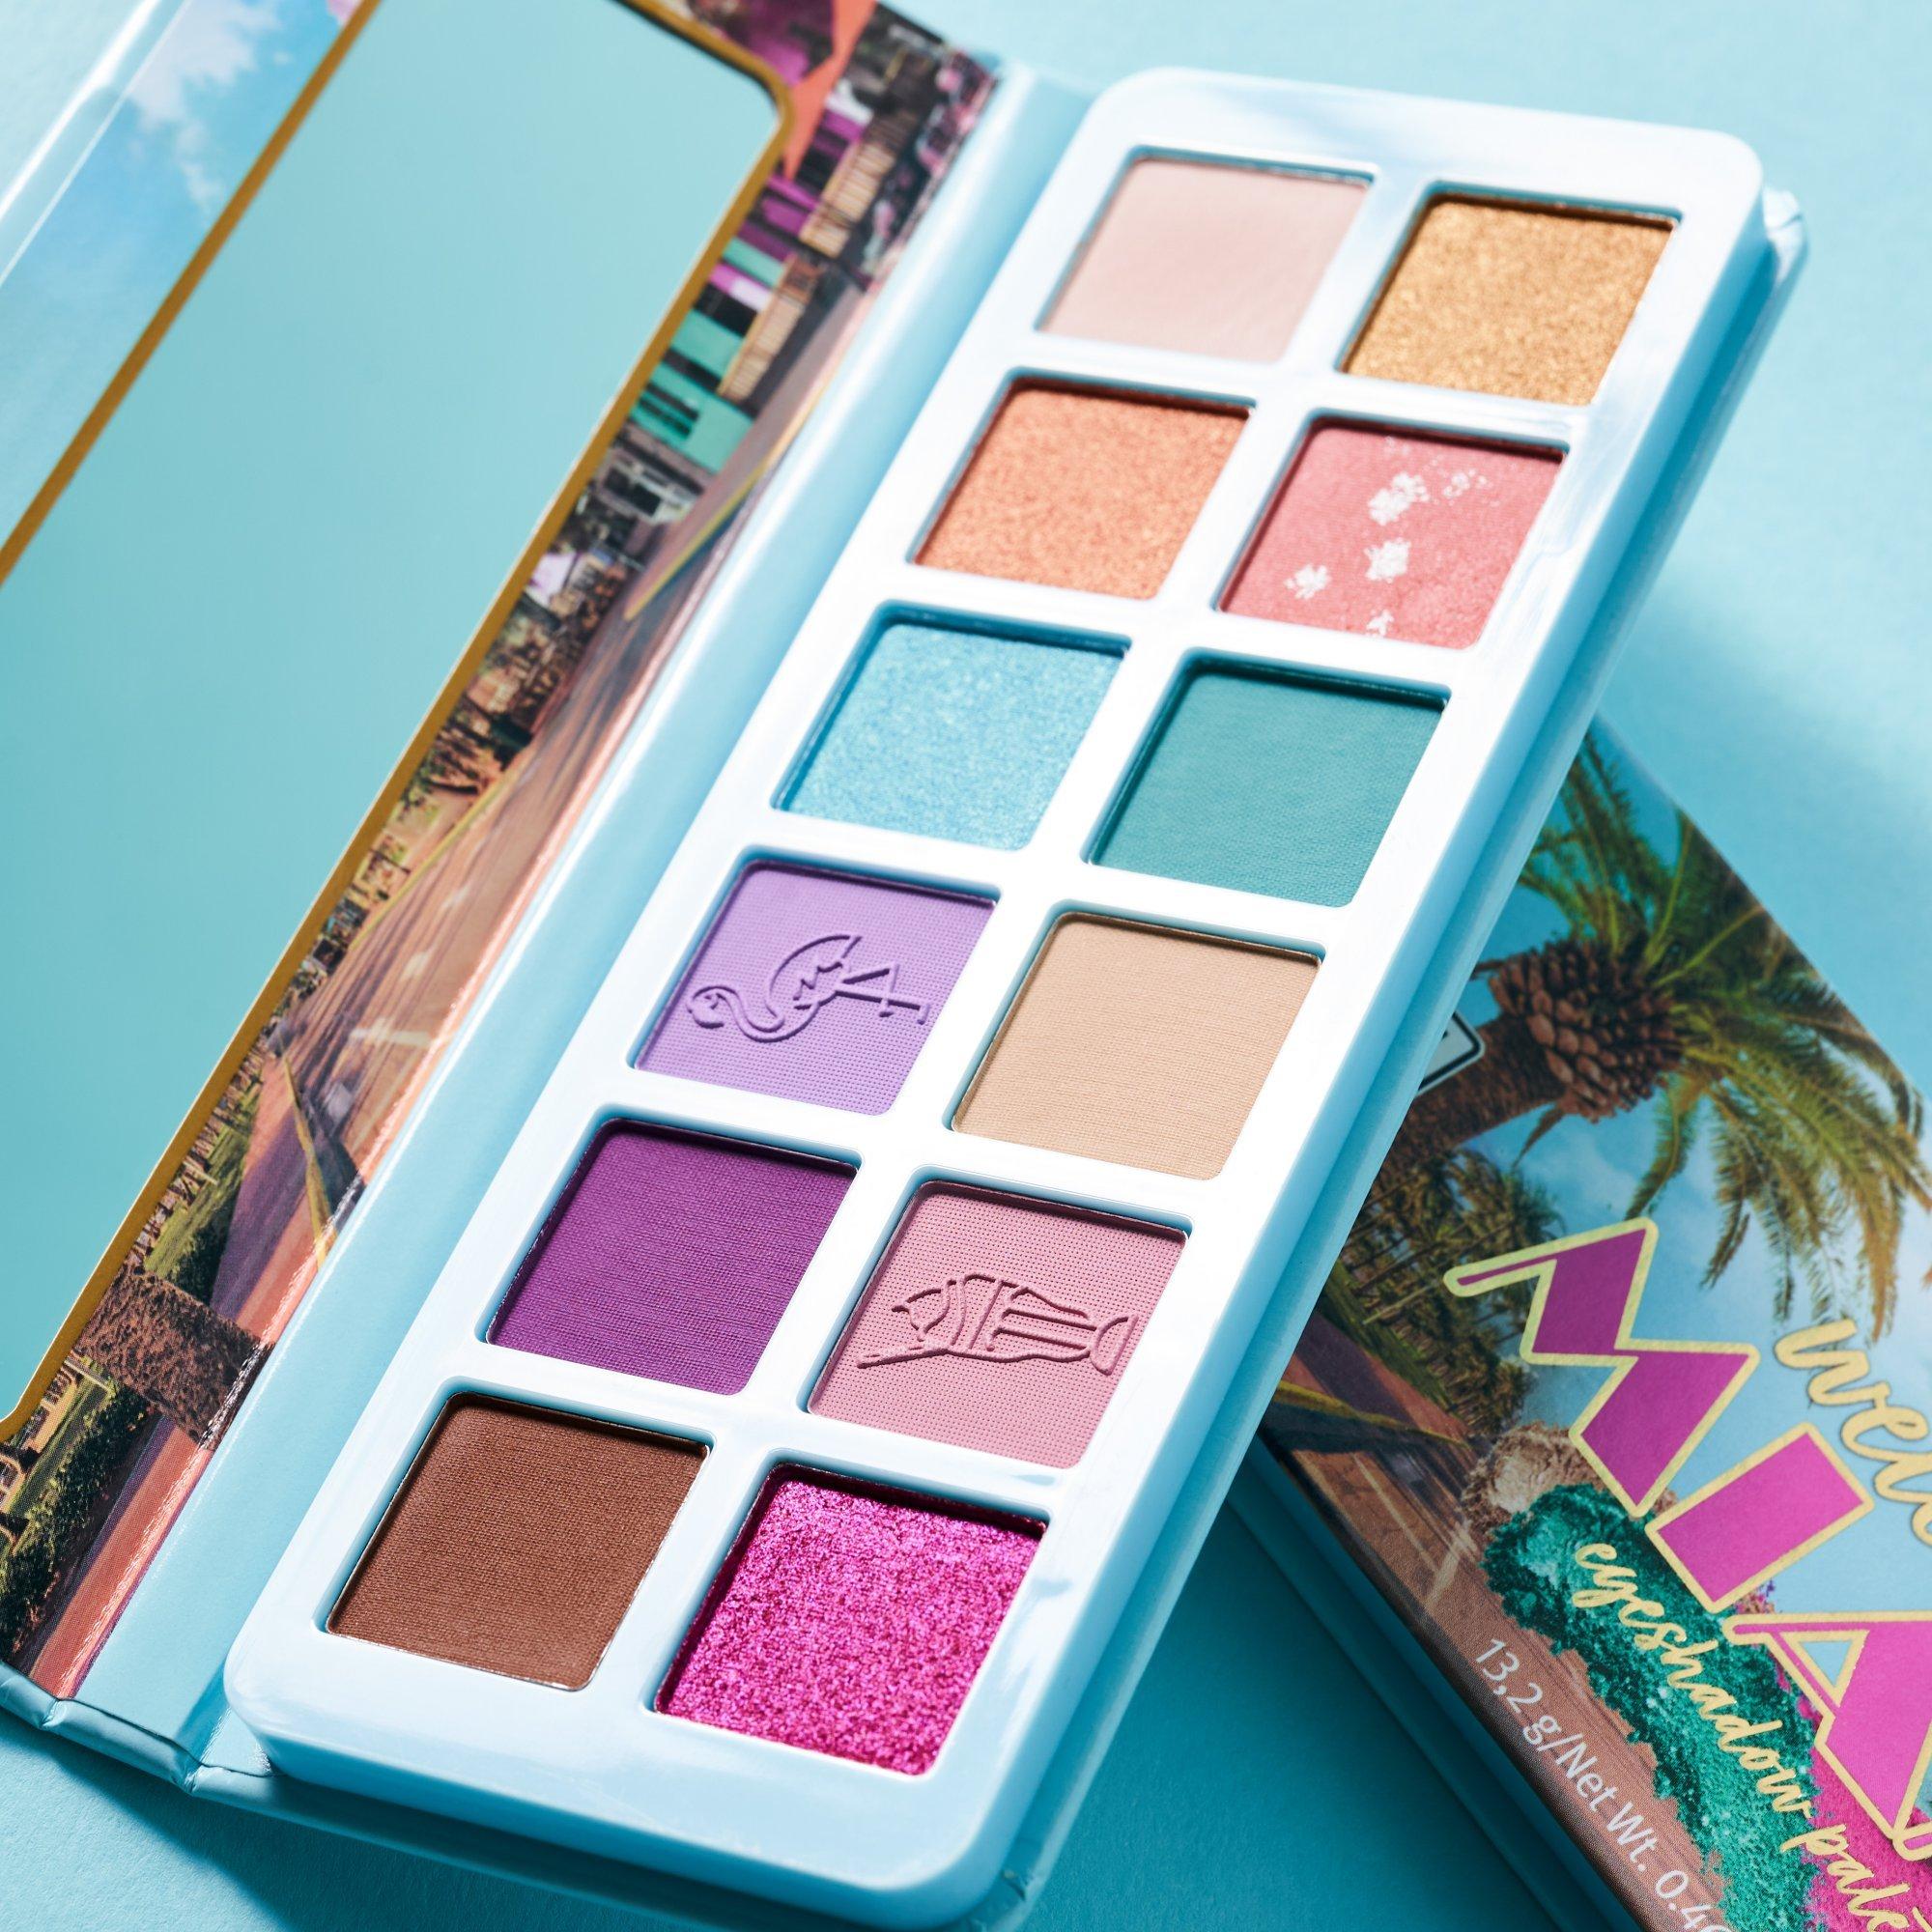 welcome to MIAMI eyeshadow palette